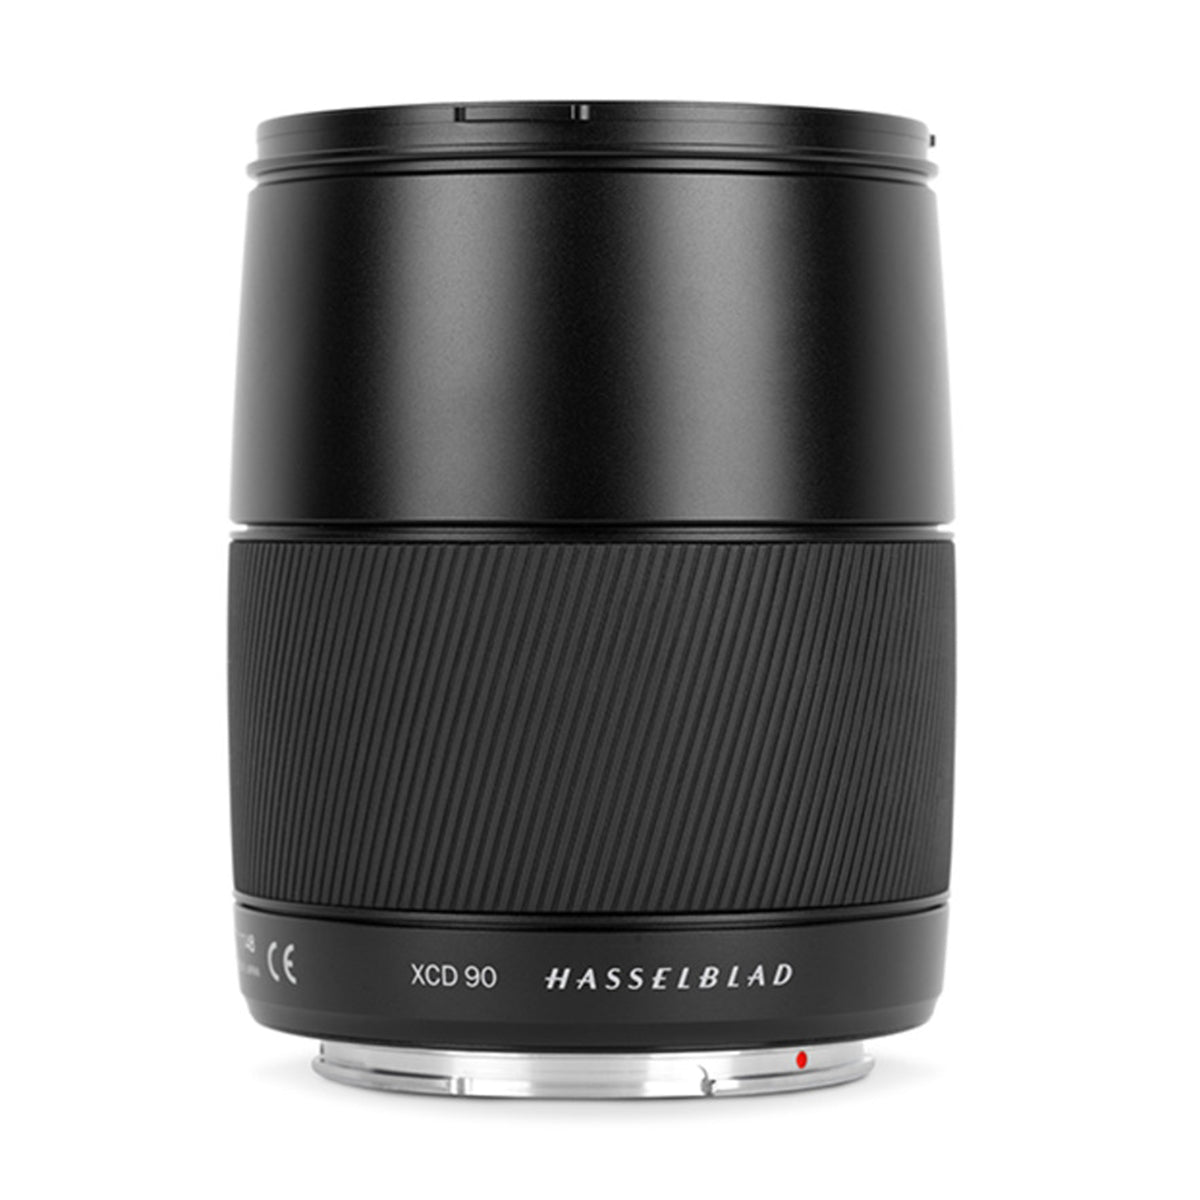 Hasselblad XCD 90mm f3.2 lens